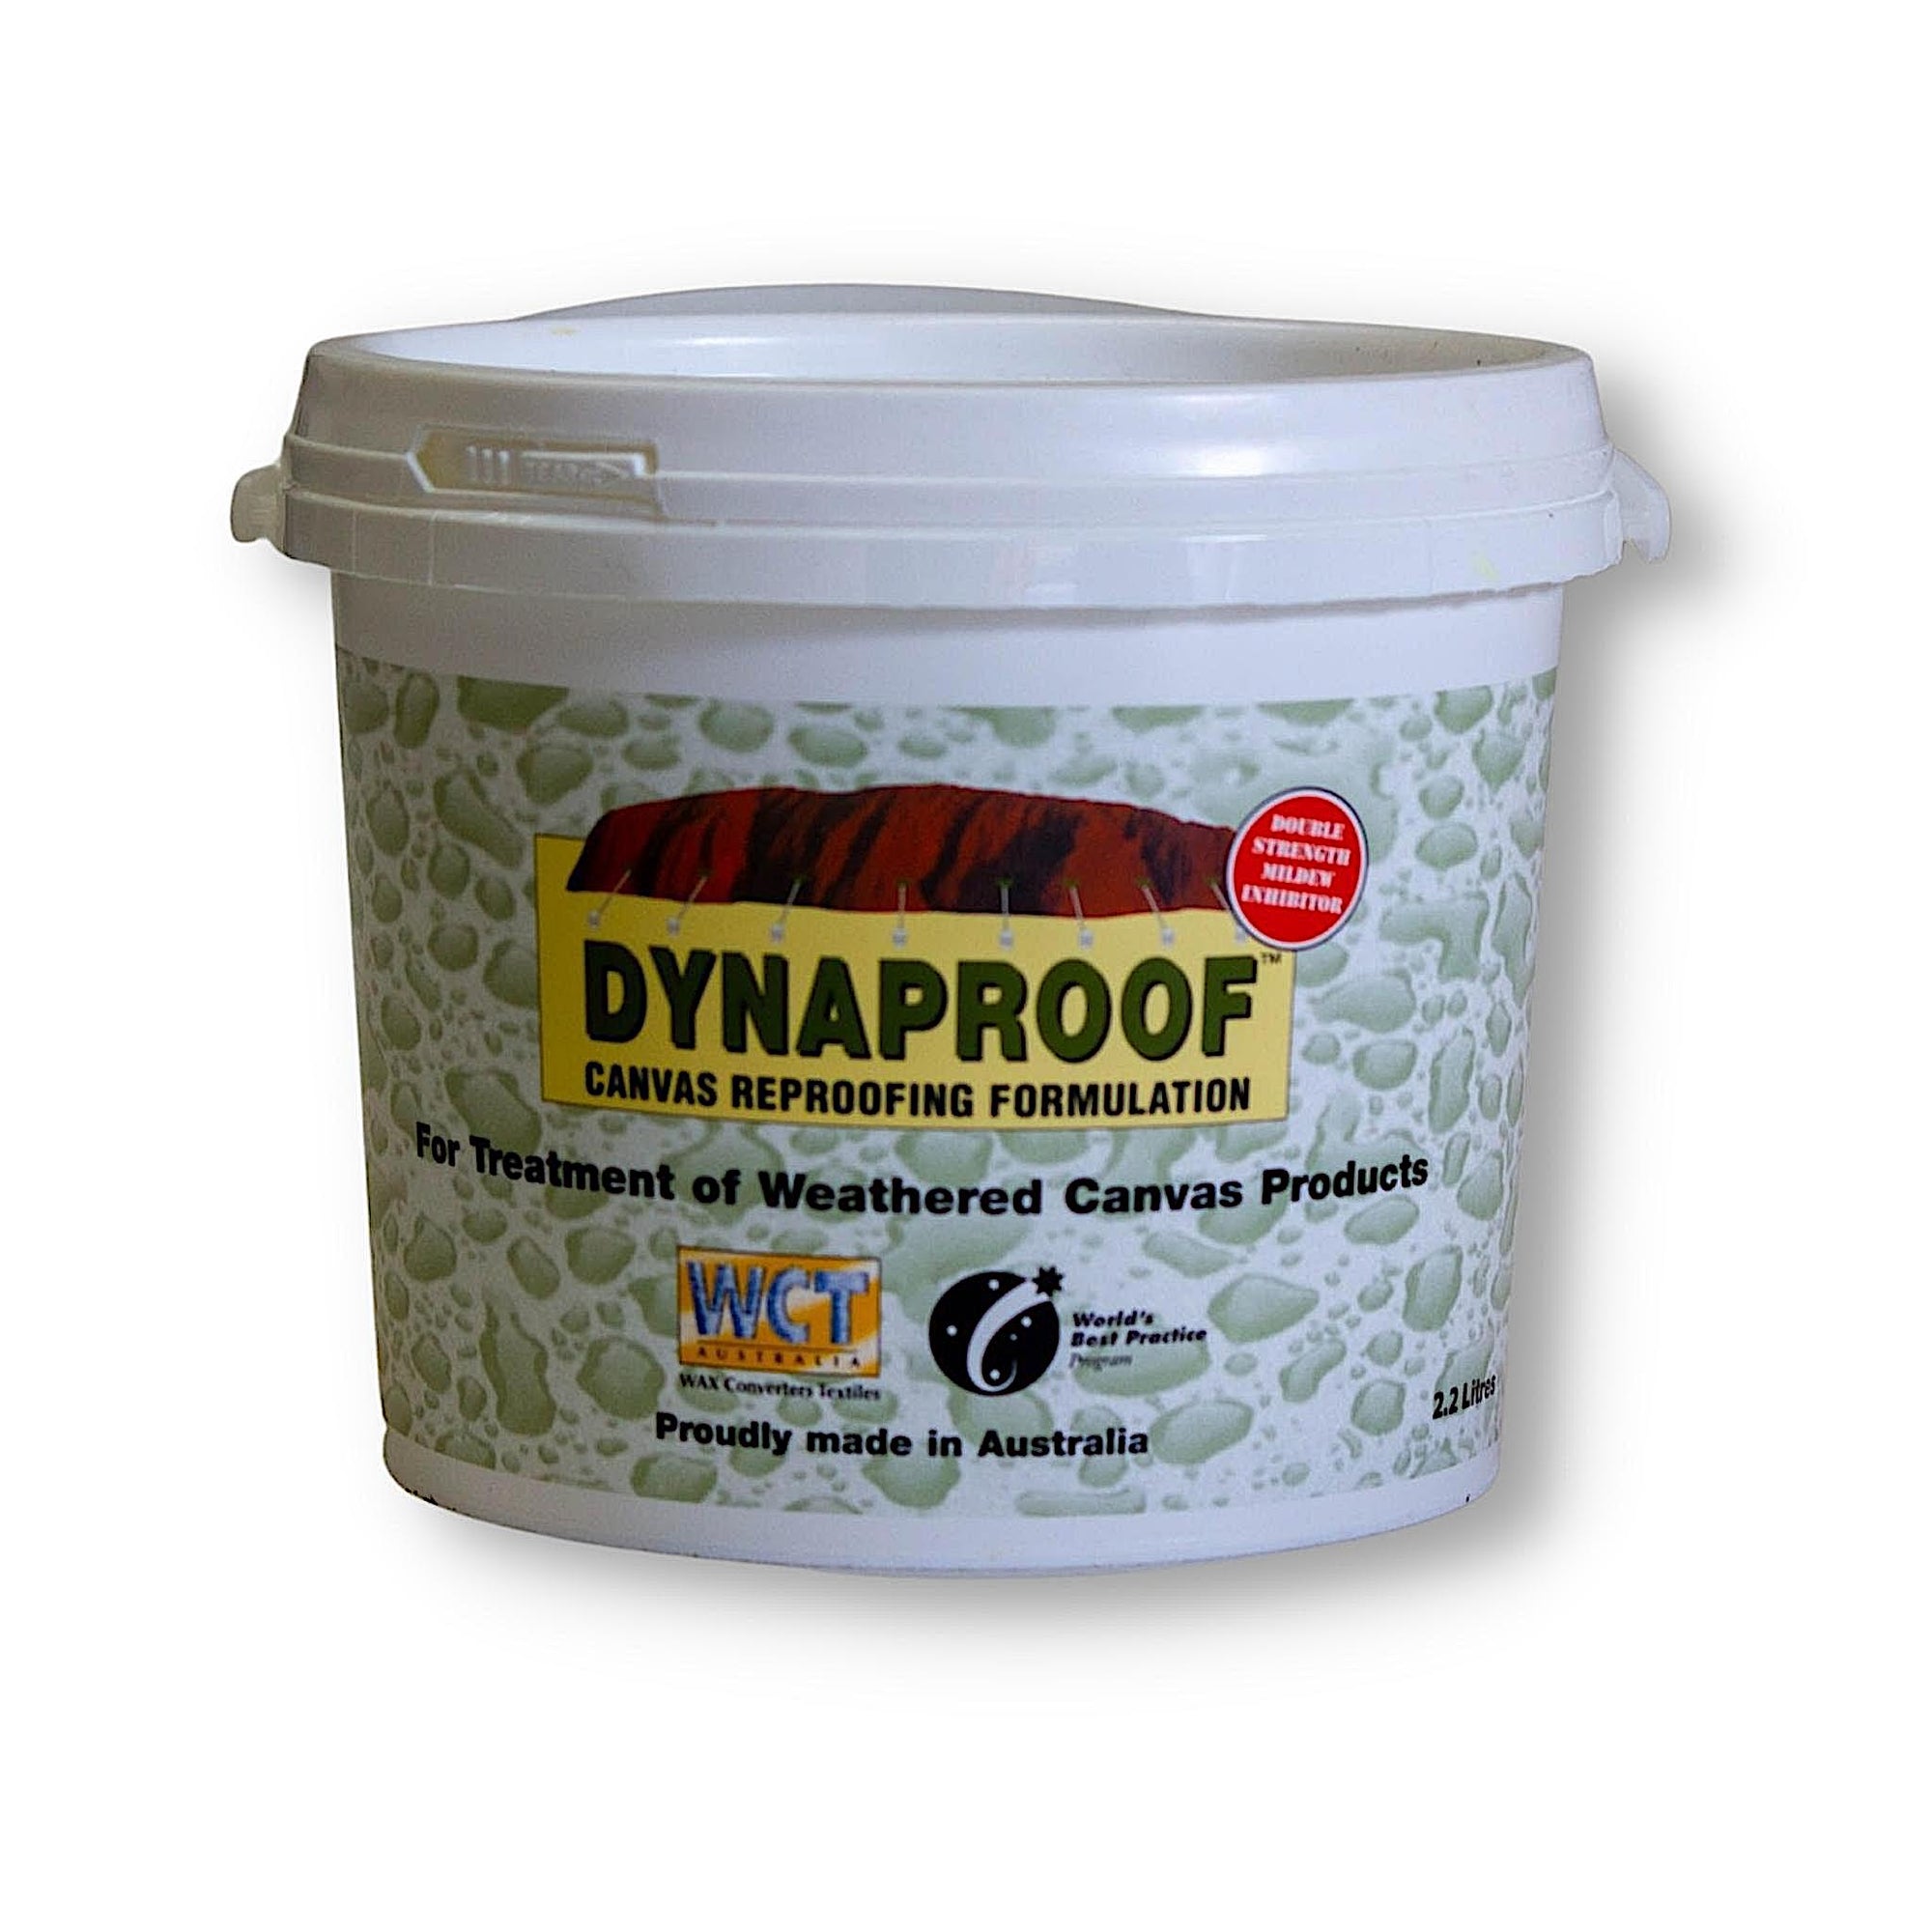 White bucket of "Dynaproof" with sealed lid and large label.